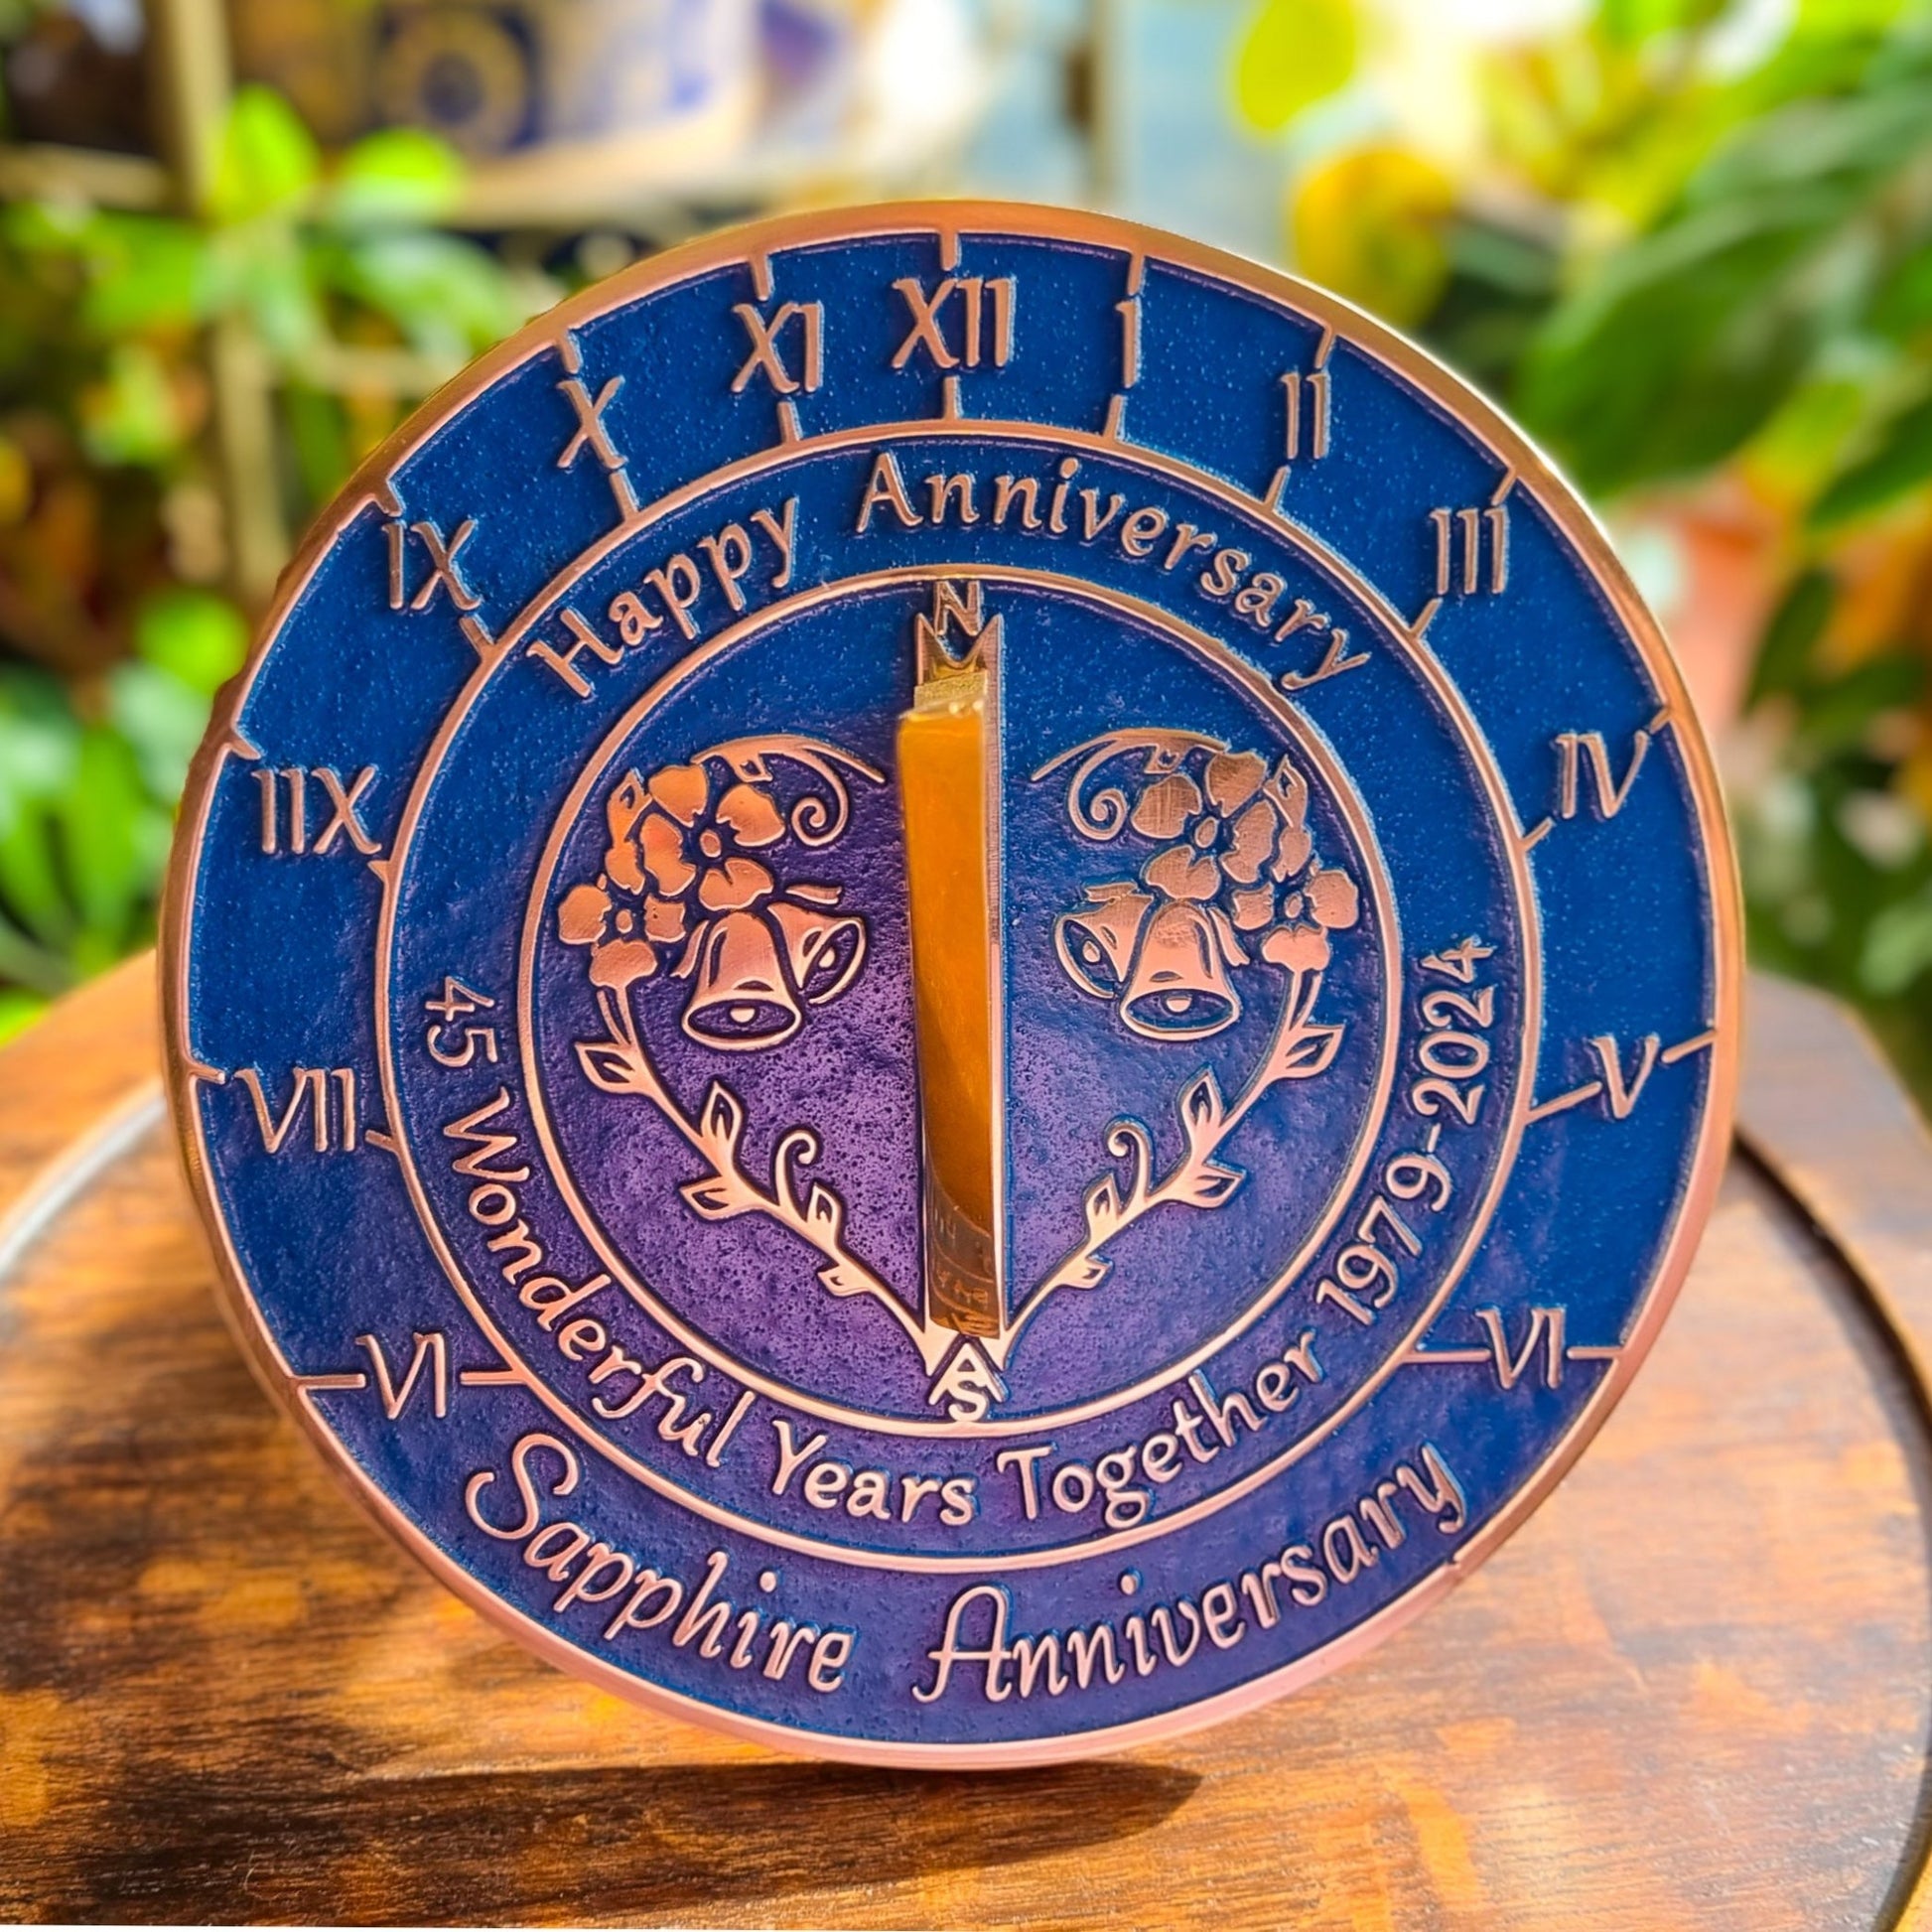 Sapphire 45th Anniversary Sundial Gift - The Metal Foundry